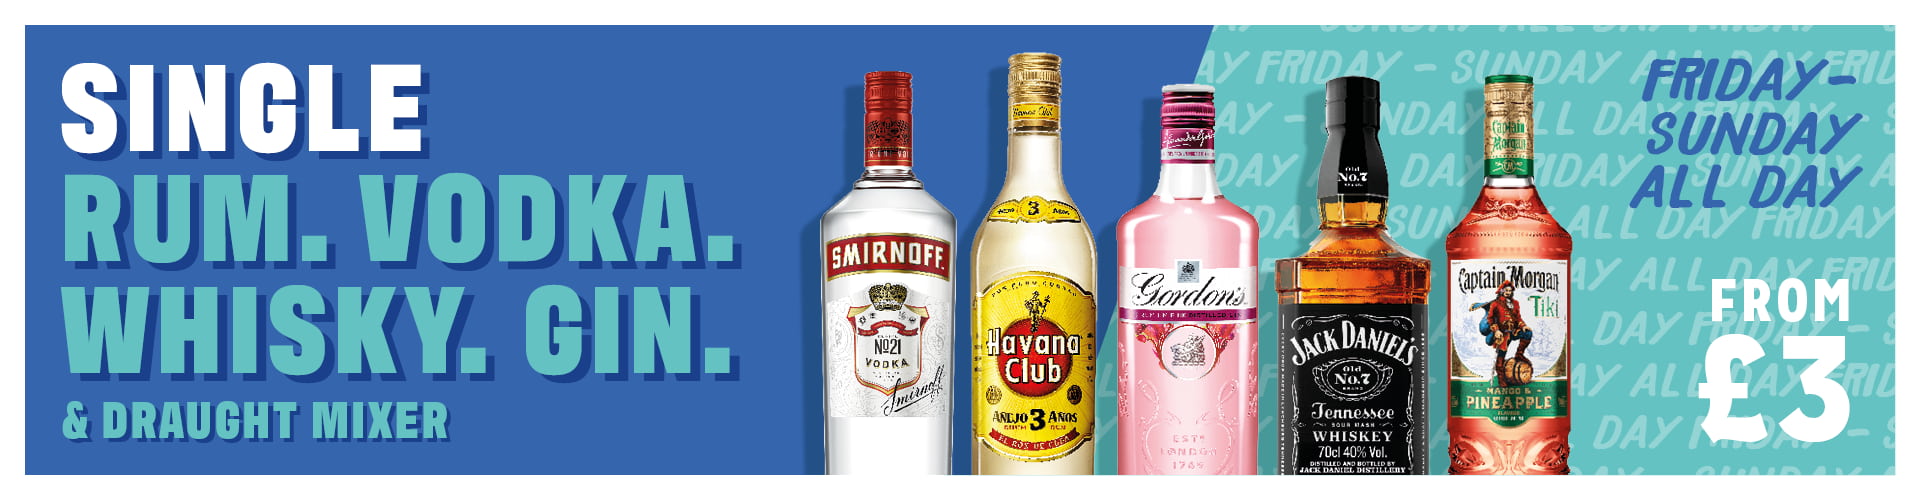 Single rum, vodka, whisky or gin and mixer for just £3. Available Friday to Sunday.